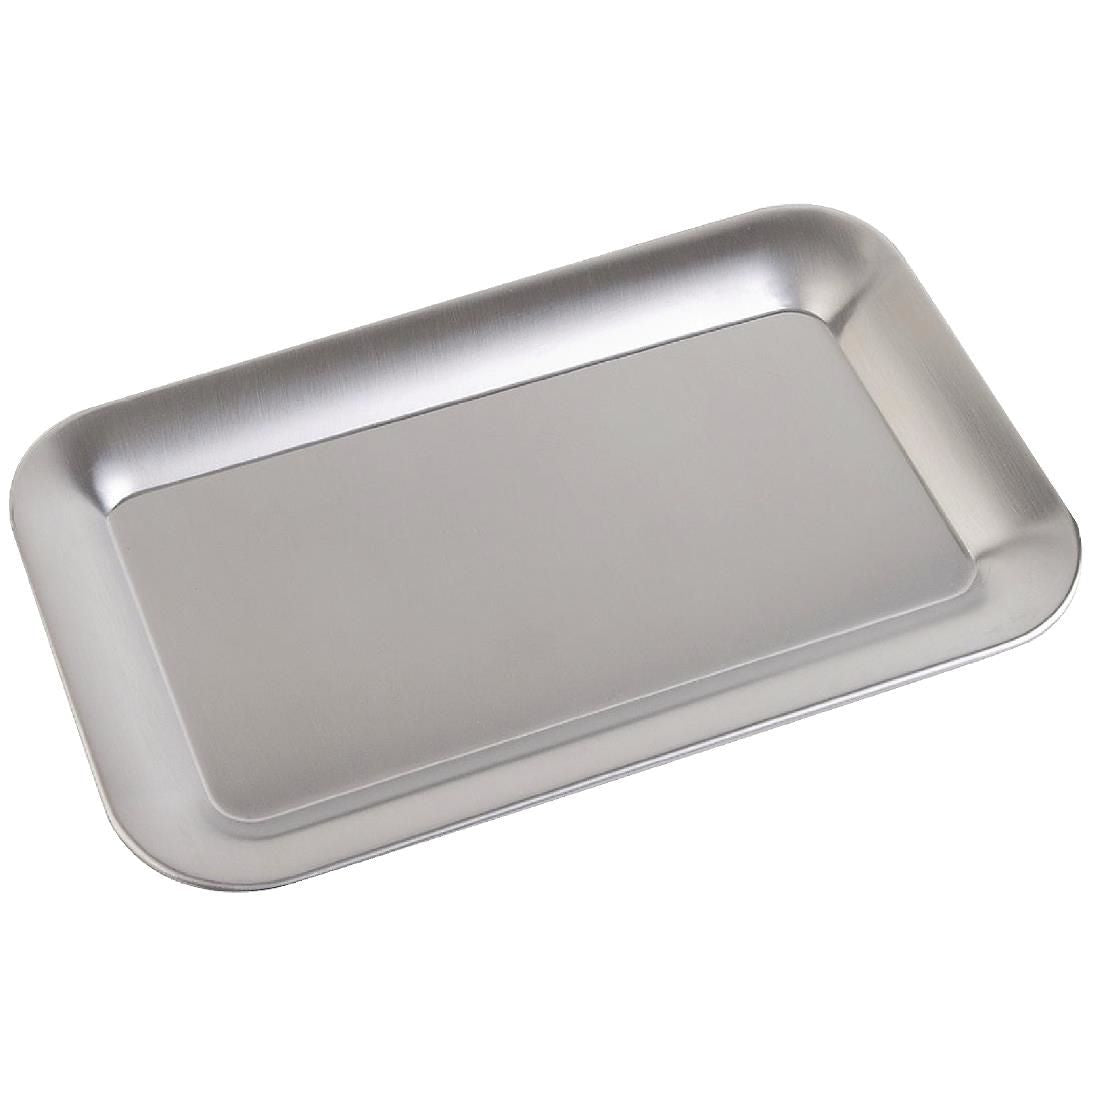 APS Stainless Steel Rectangular Service Tray 215mm JD Catering Equipment Solutions Ltd